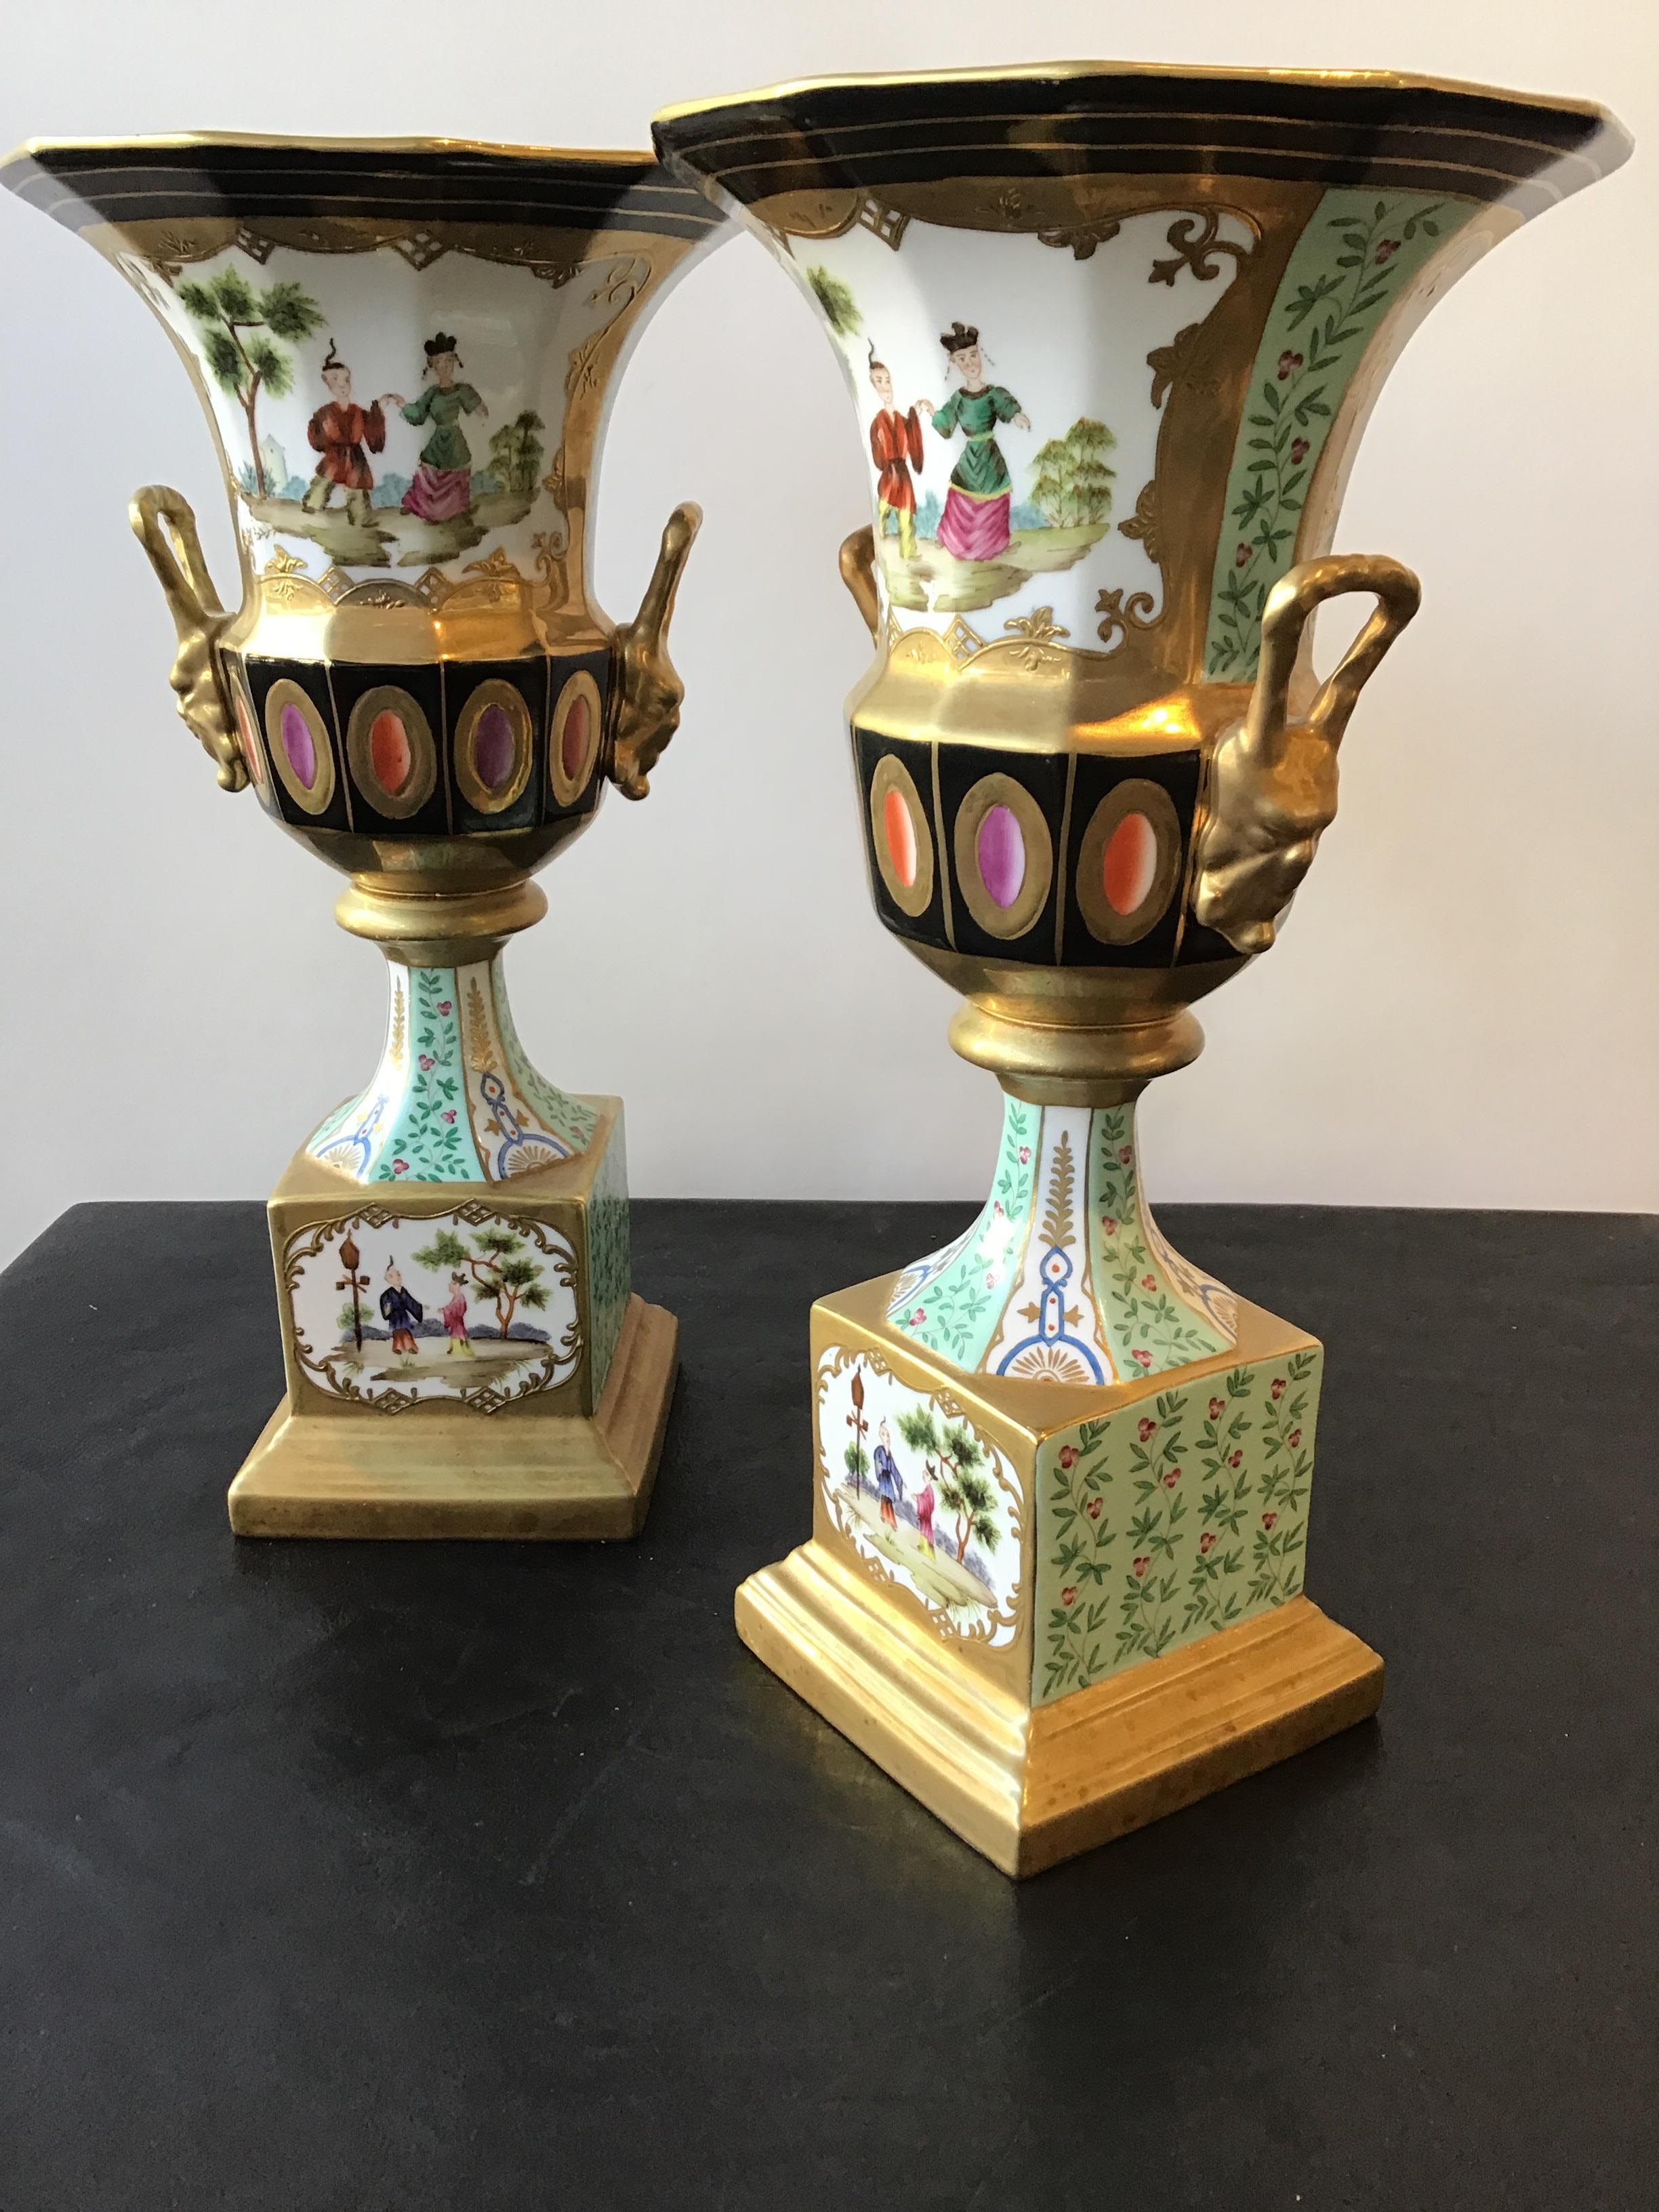 Pair of hand painted porcelain chinoiserie urns with gilt accents by Chelsea House.